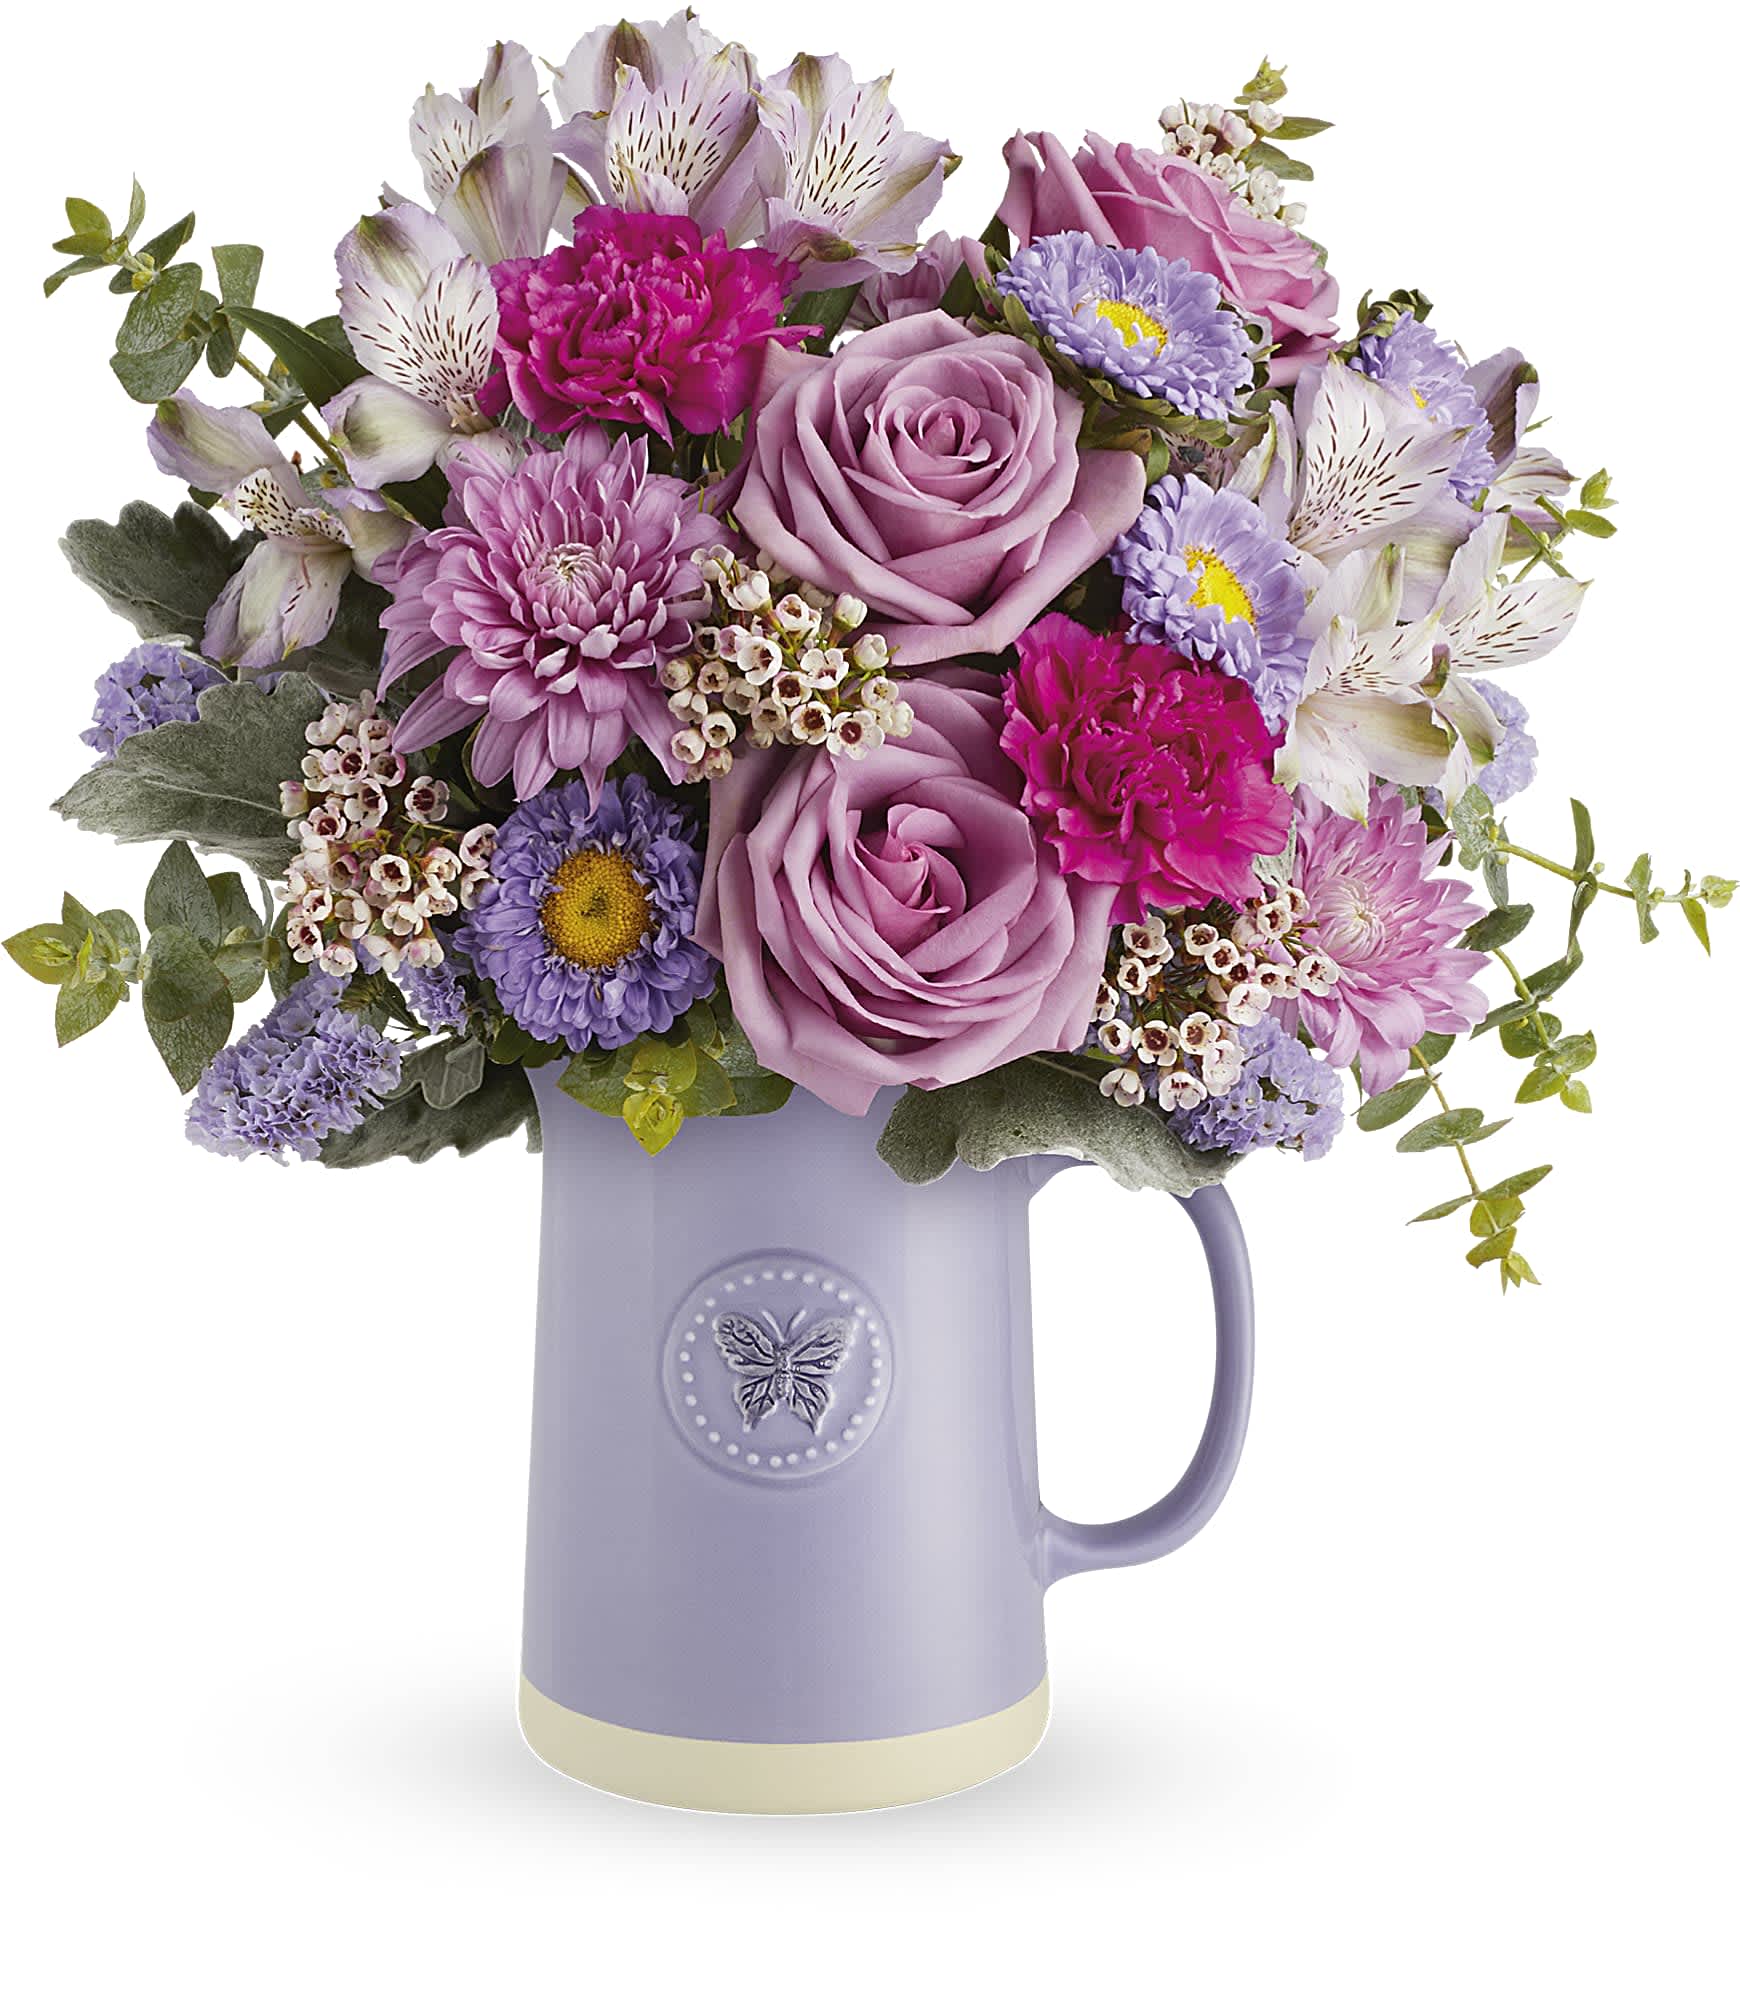 Sweetest Flutter  - Gift mom the artisanal charm she loves with our Teleflora's Sweetest Flutter glazed ceramic pitcher, adorned with embossed butterfly detail and a natural base, perfect for year-round use and sure to add a touch of elegance to any table setting. Surprise her with Teleflora's Sweetest Flutter bouquet-lavender roses, alstroemeria, fuchsia carnations, matsumoto asters, cushion spray chrysanthemums, sinuata statice, pink waxflower, dusty miller, and spiral eucalyptus-in the food-safe glazed ceramic pitcher, featuring embossed butterfly detail, a cherished gift for the artisanal-loving mom. Approximately 14&quot; W x 14 1/2&quot; H